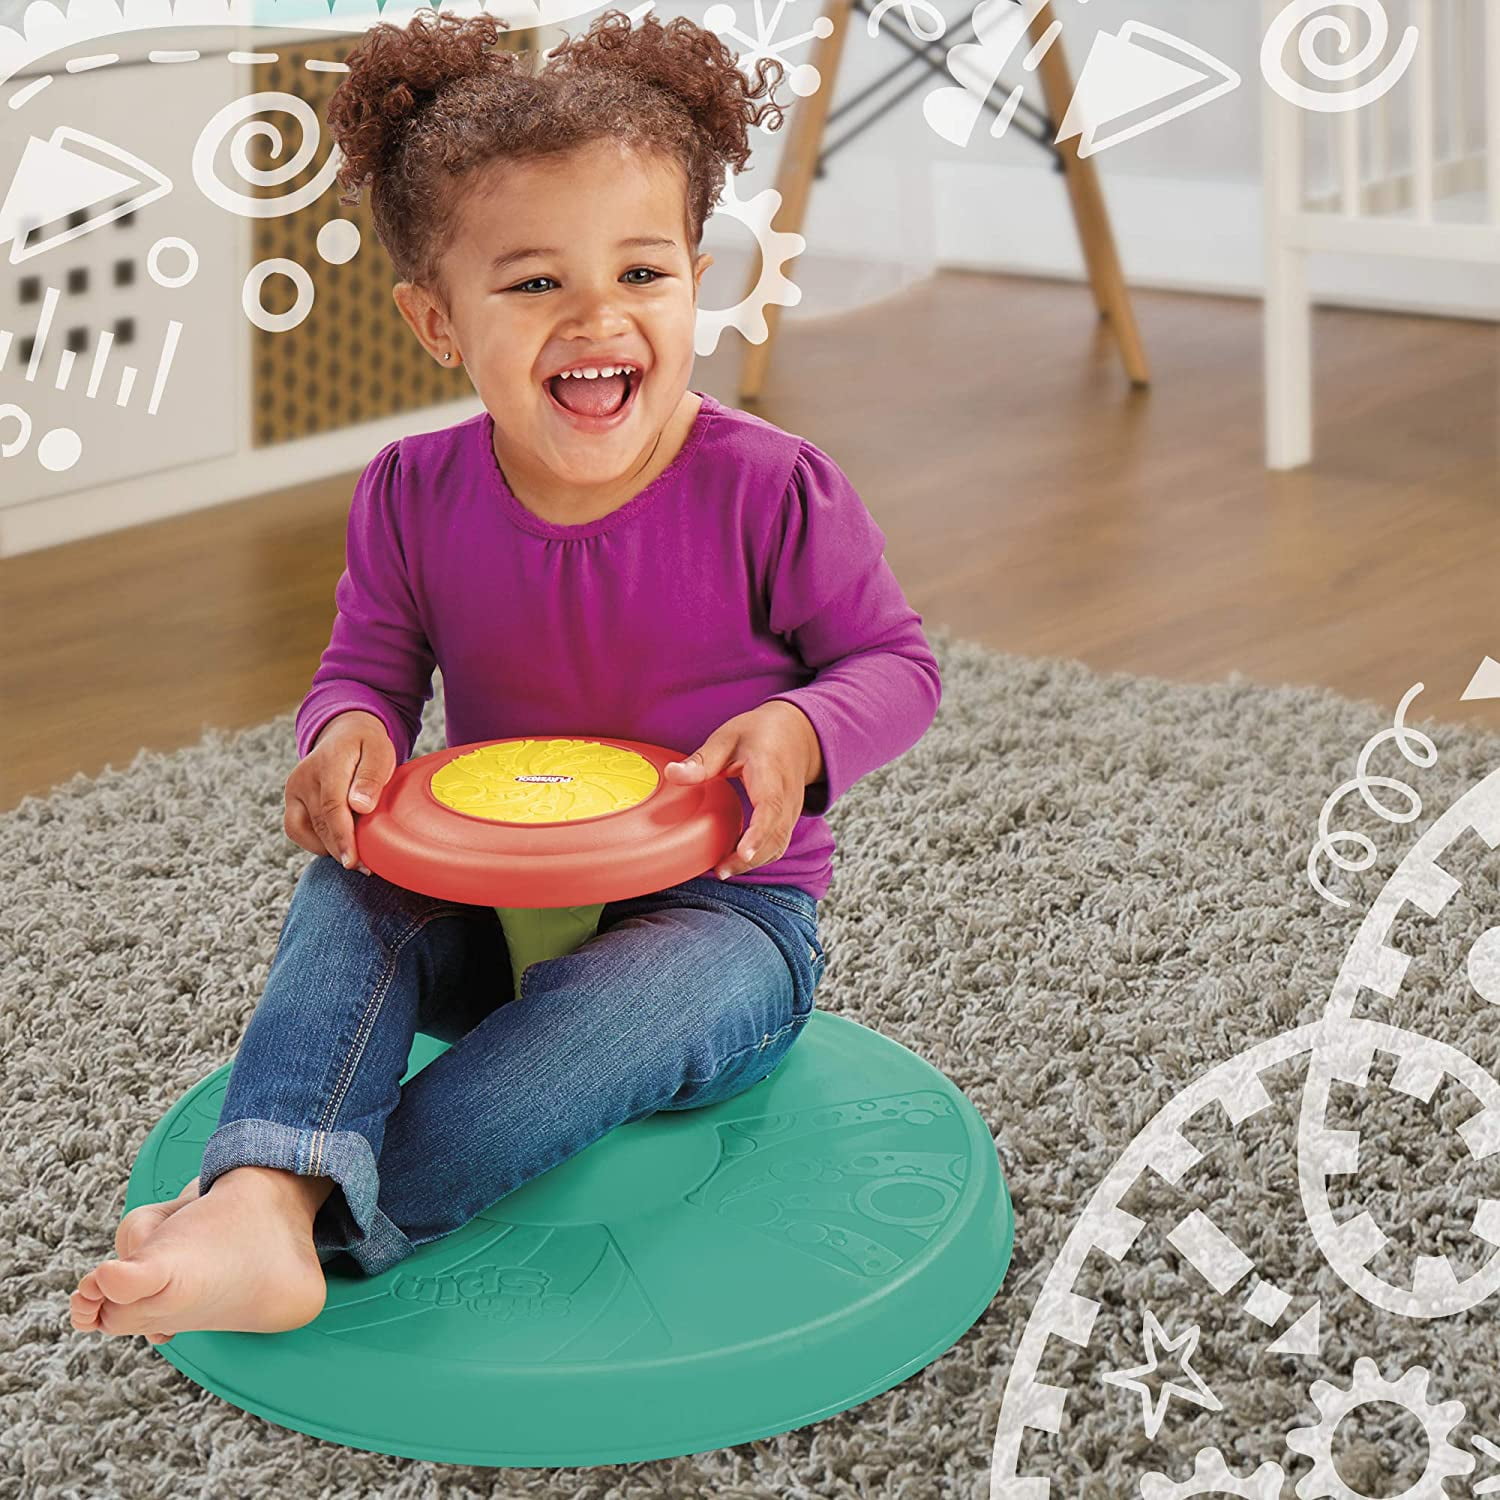 Playskool Sit ‘n Spin Classic Spinning Activity Toy for Toddlers Ages Over 18 